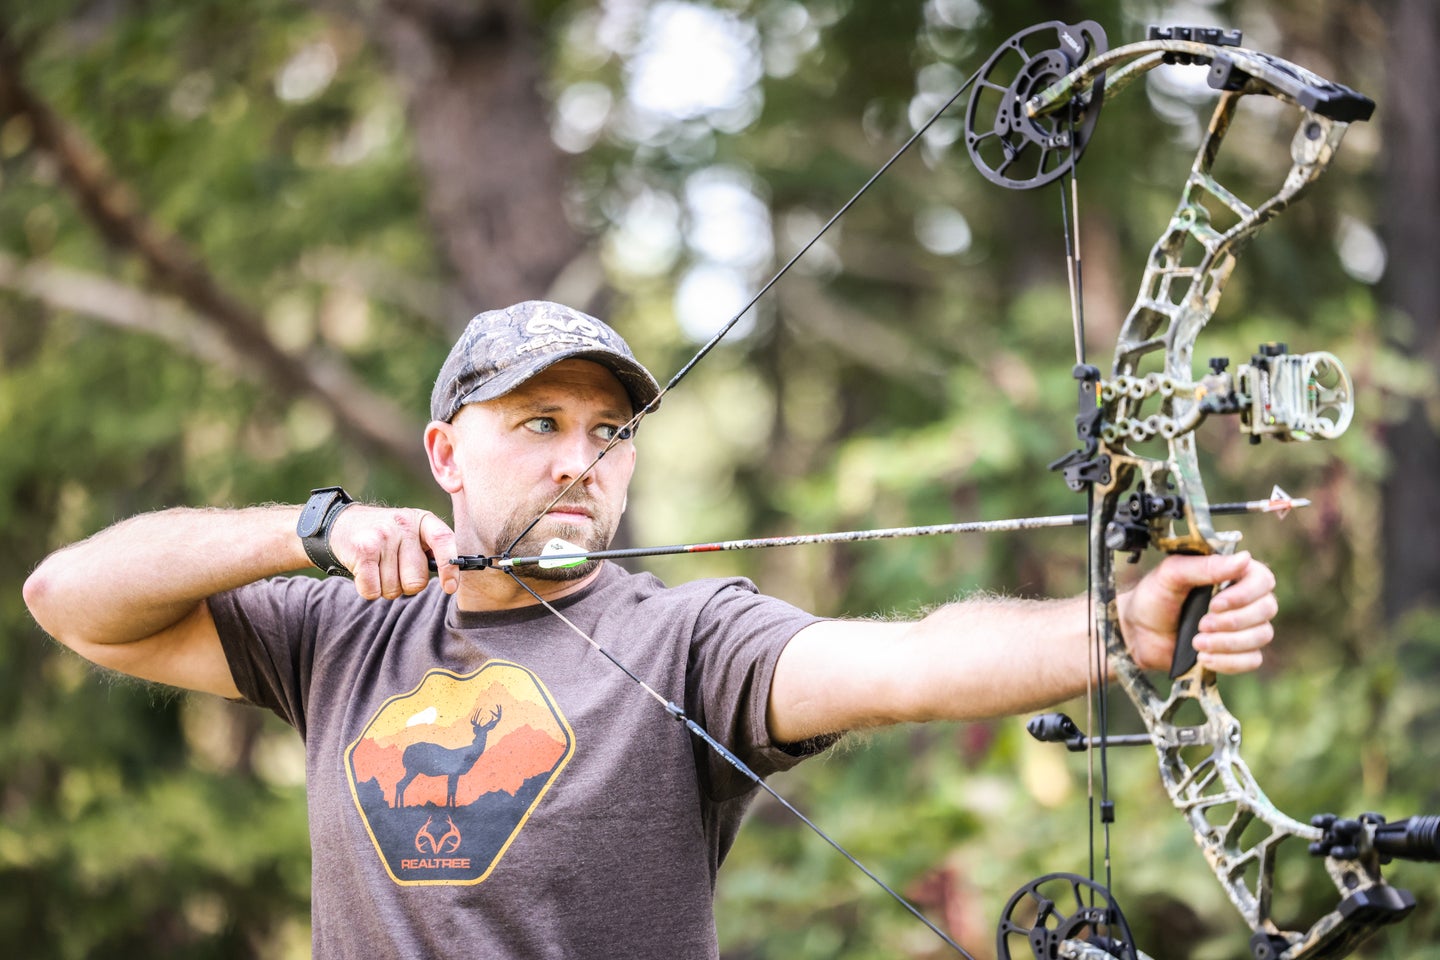 Will Brantley shoots Hoyt Ventum compound bow